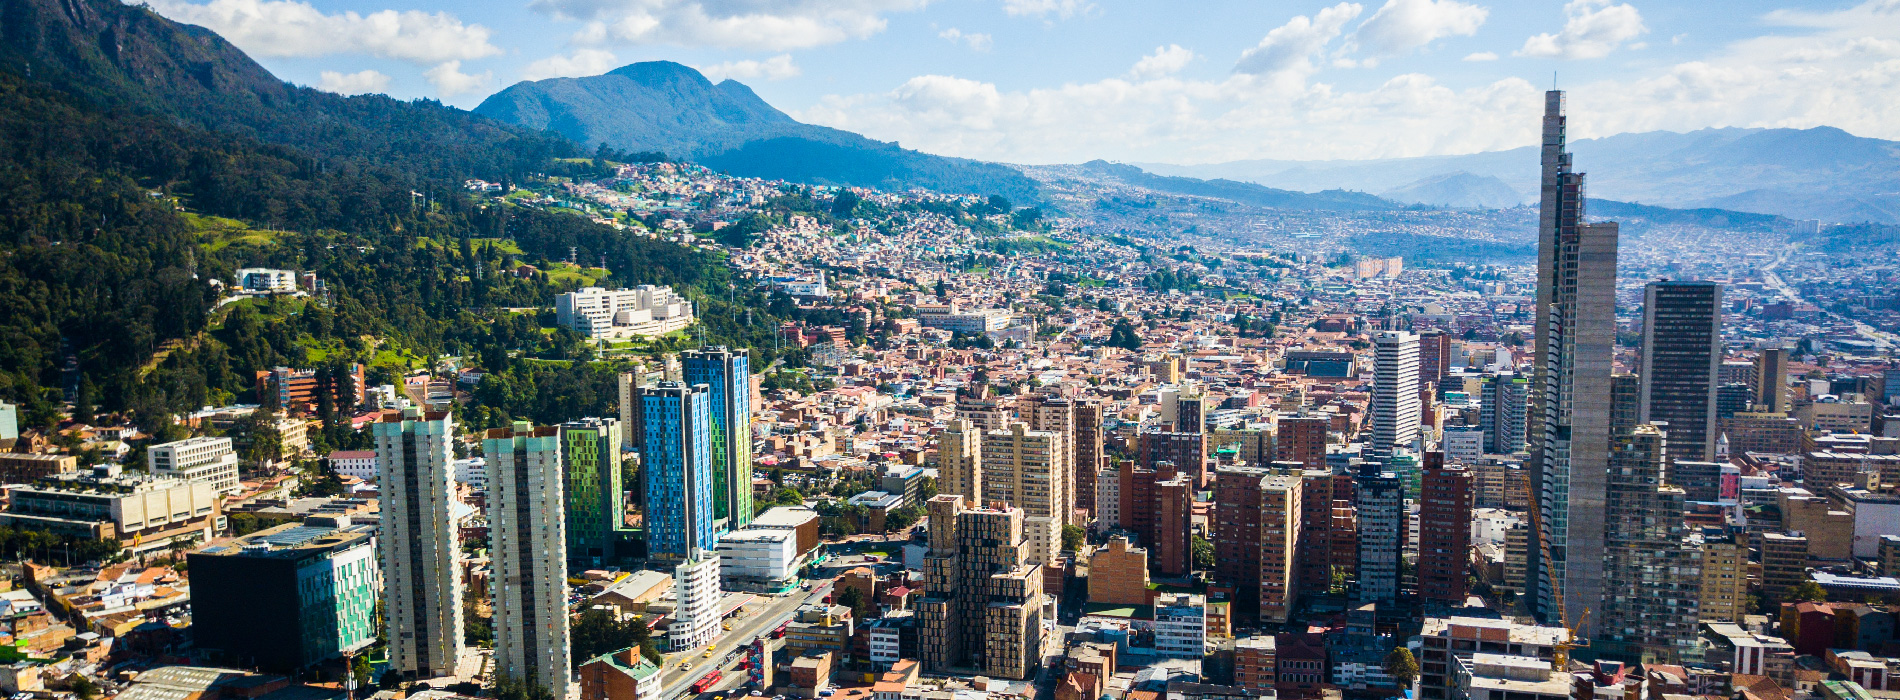 The American Company Salesforce Keeps Expanding its horizons in Colombia 